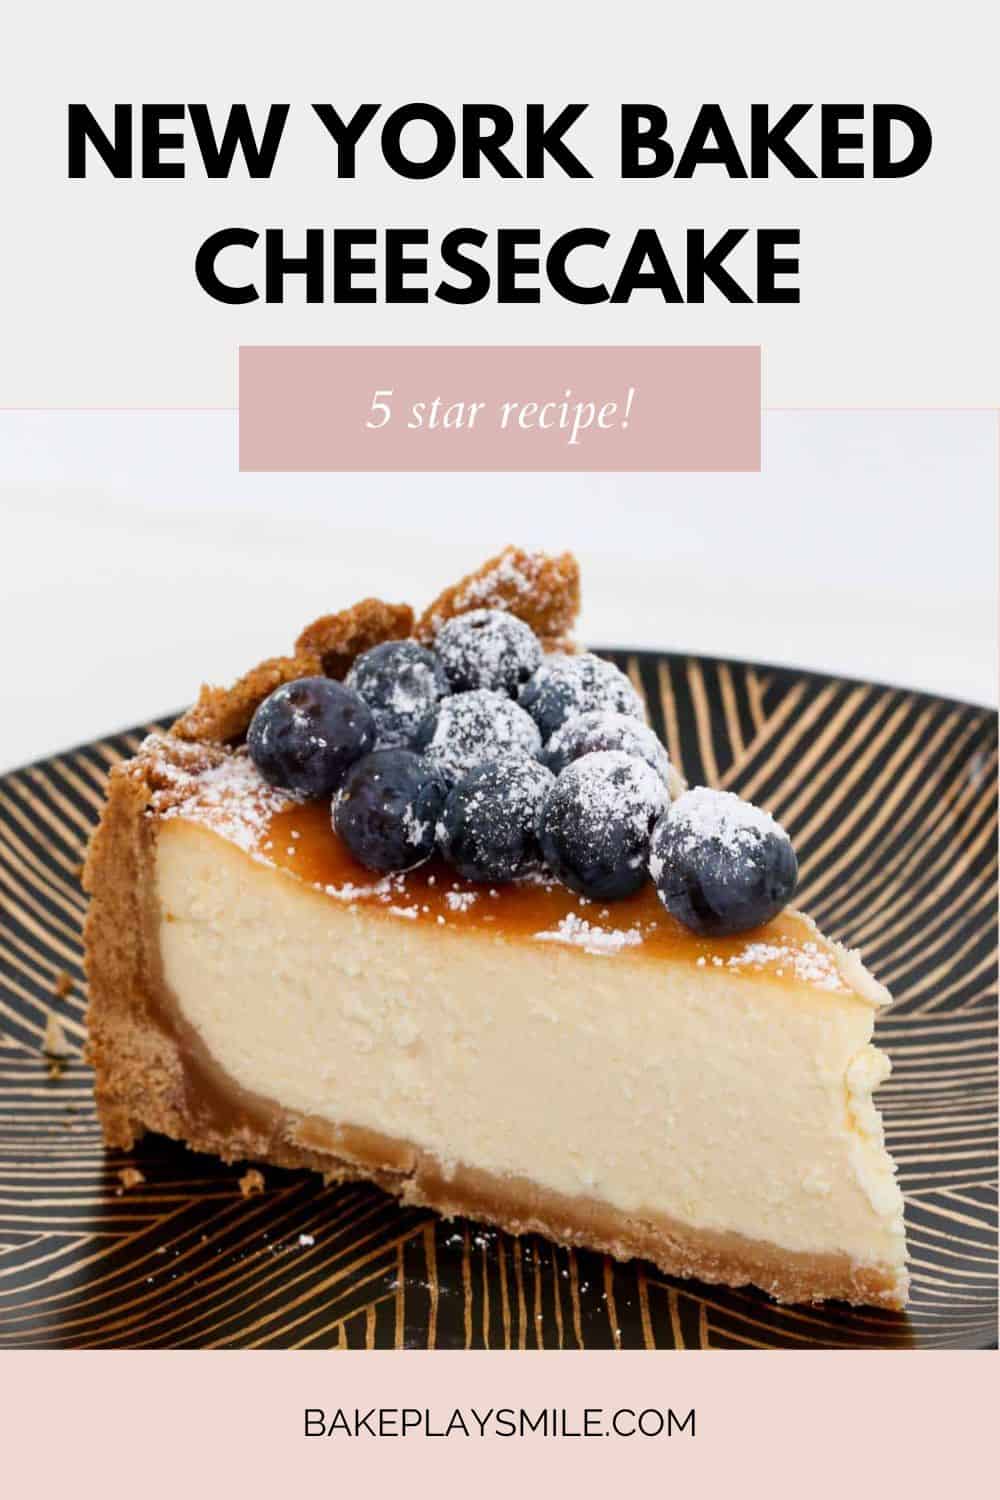 Essential Cheesecake Baking Set by The Perfect Cheesecake Bakeware